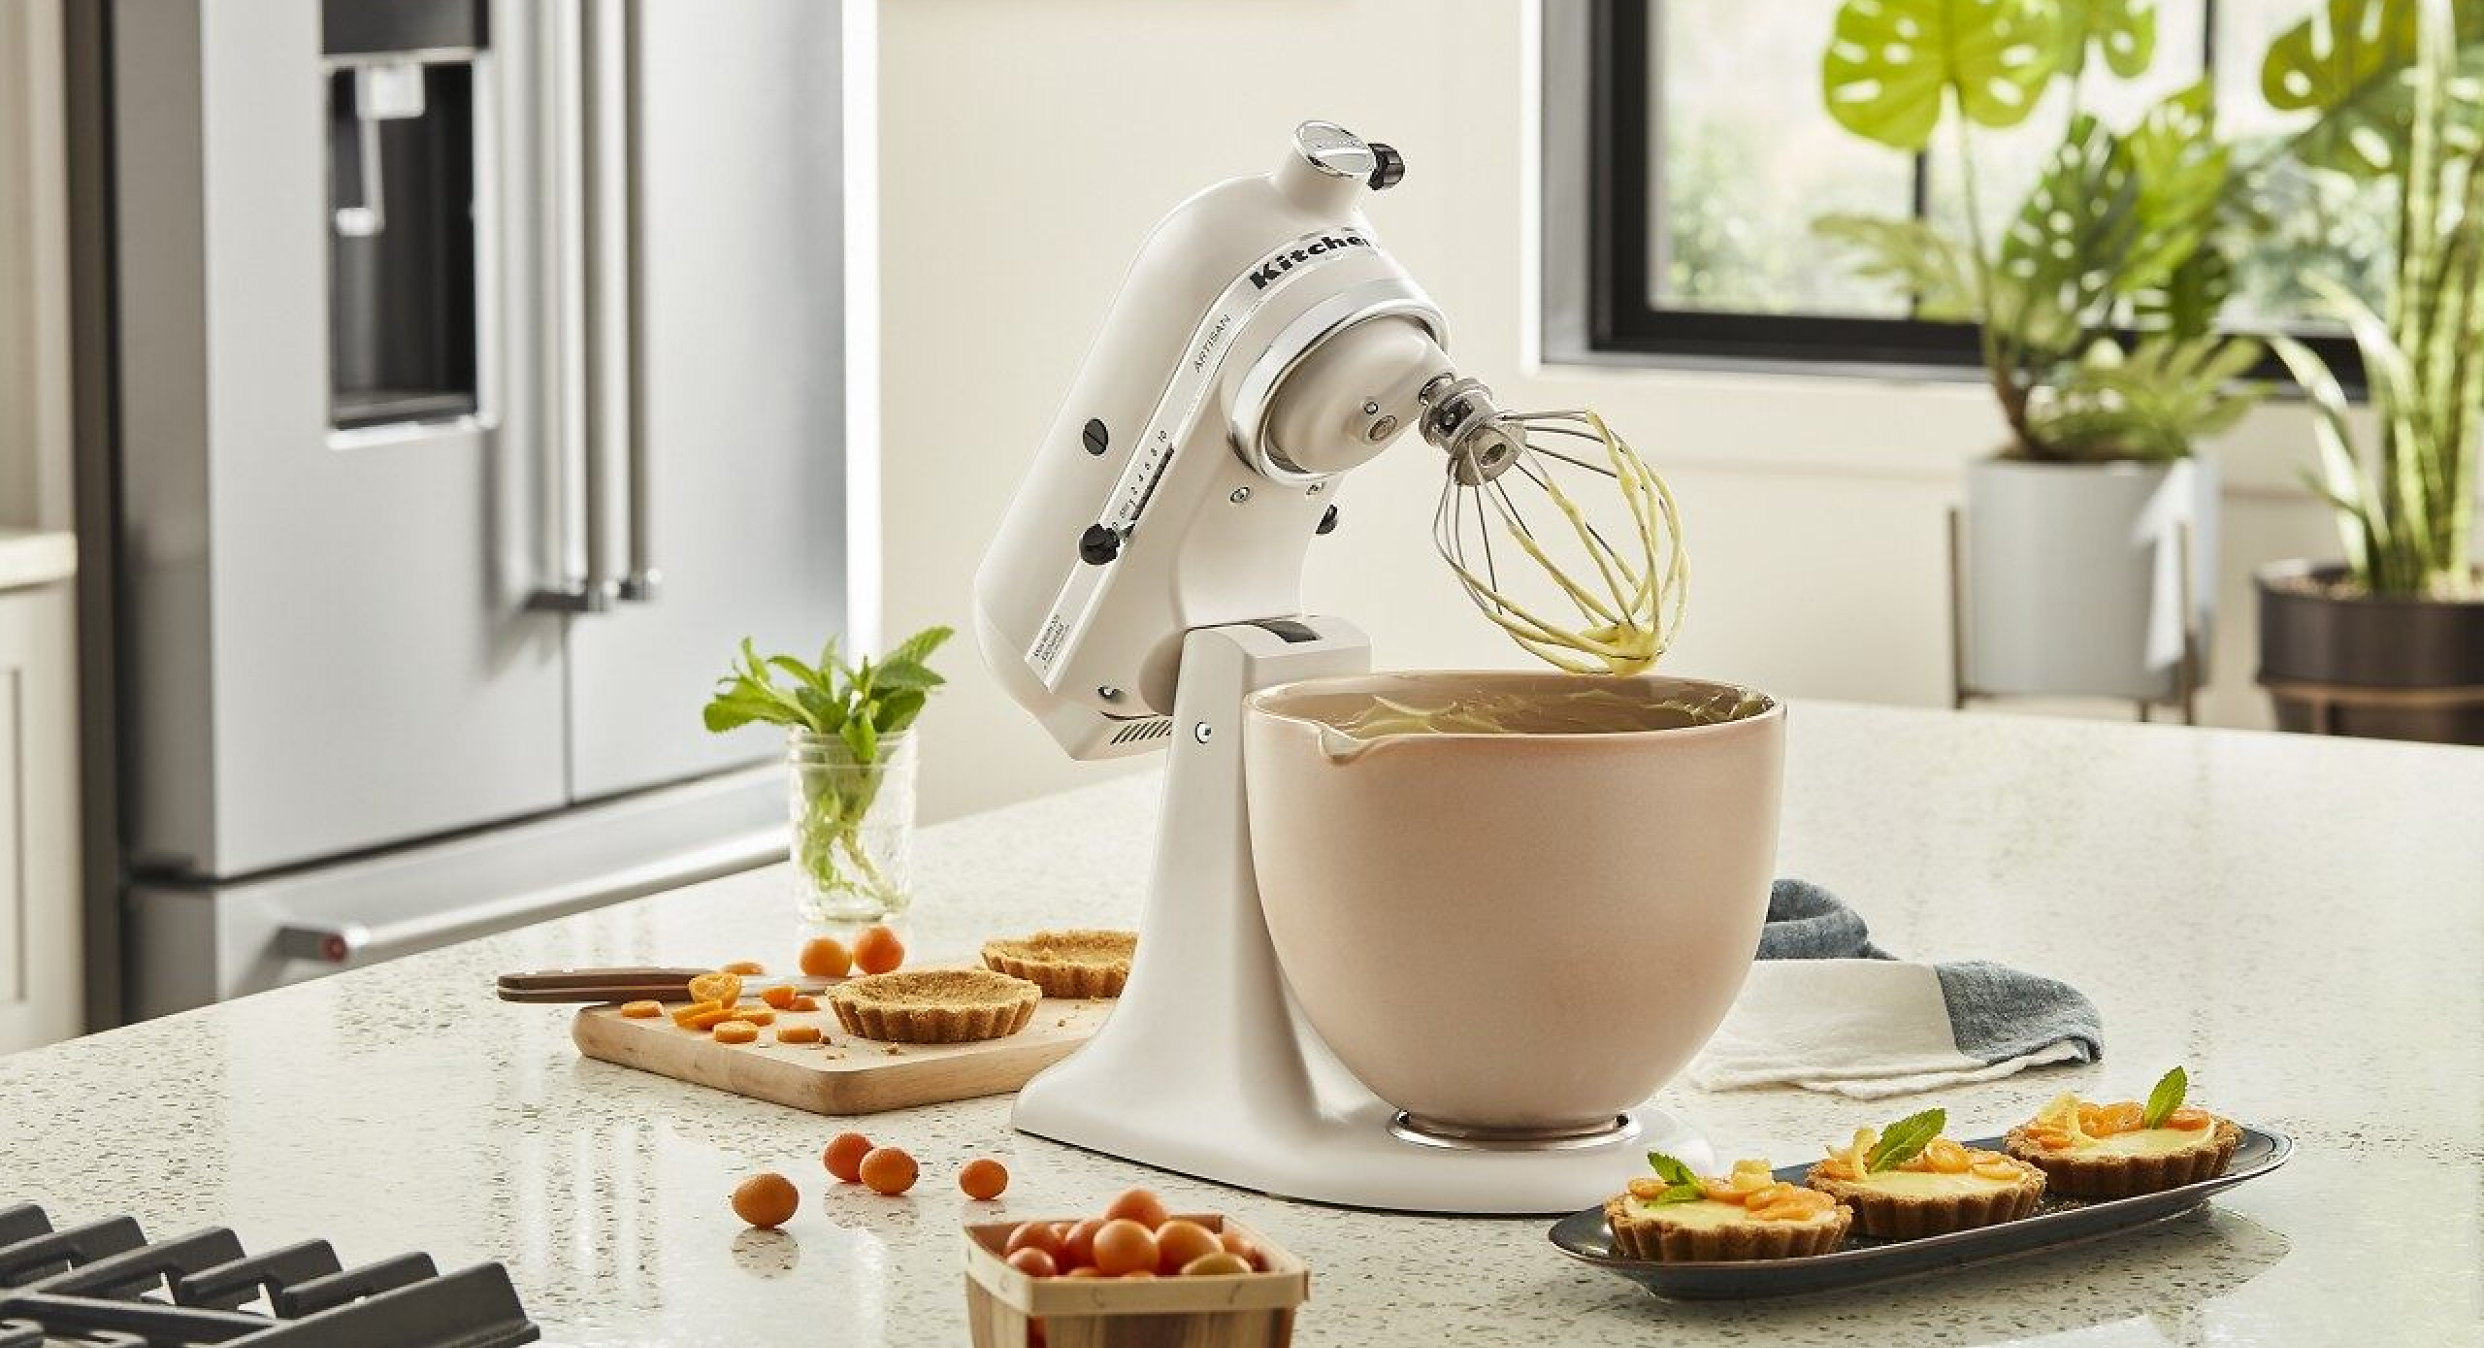 A white stand mixer on a kitchen island with baking ingredients